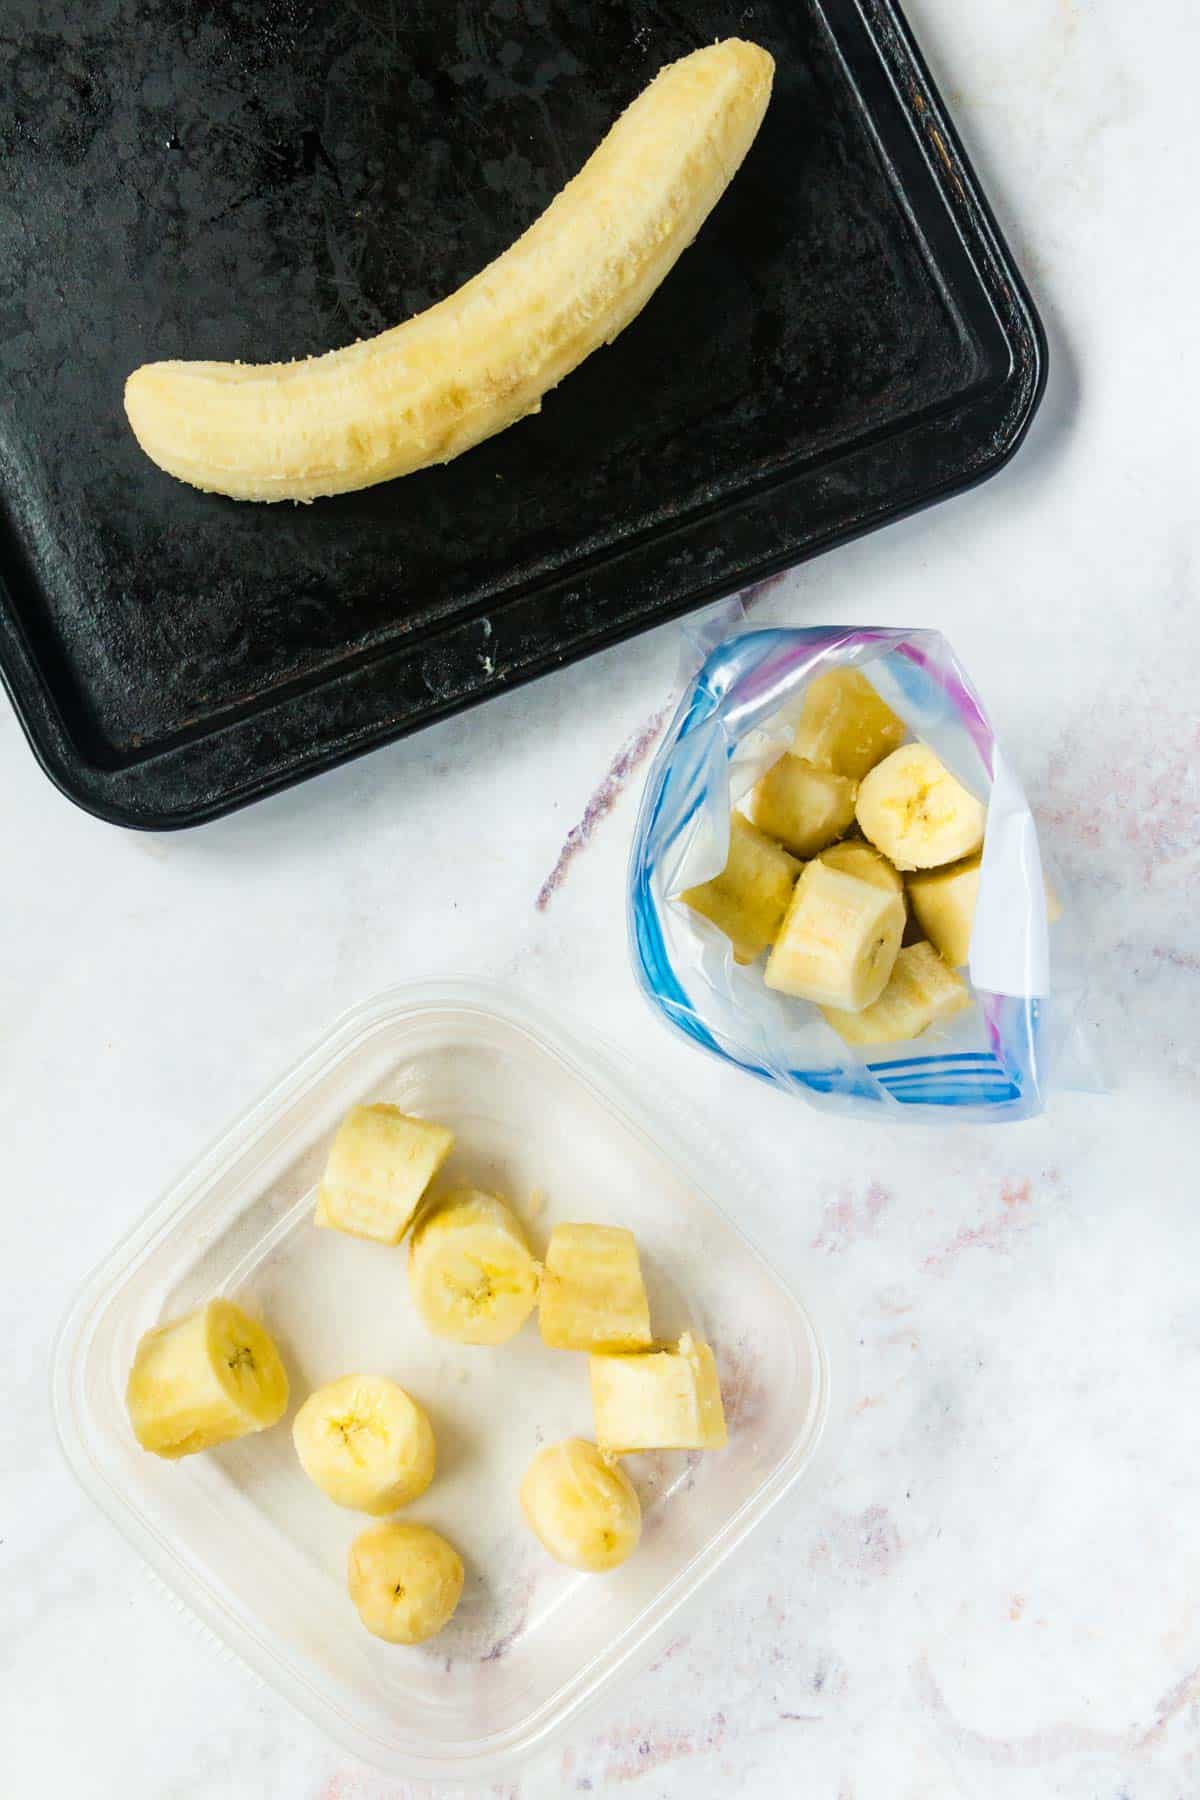 A frozen whole banana on a sheet pan, and chunks in a plastic bag and a plastic container.